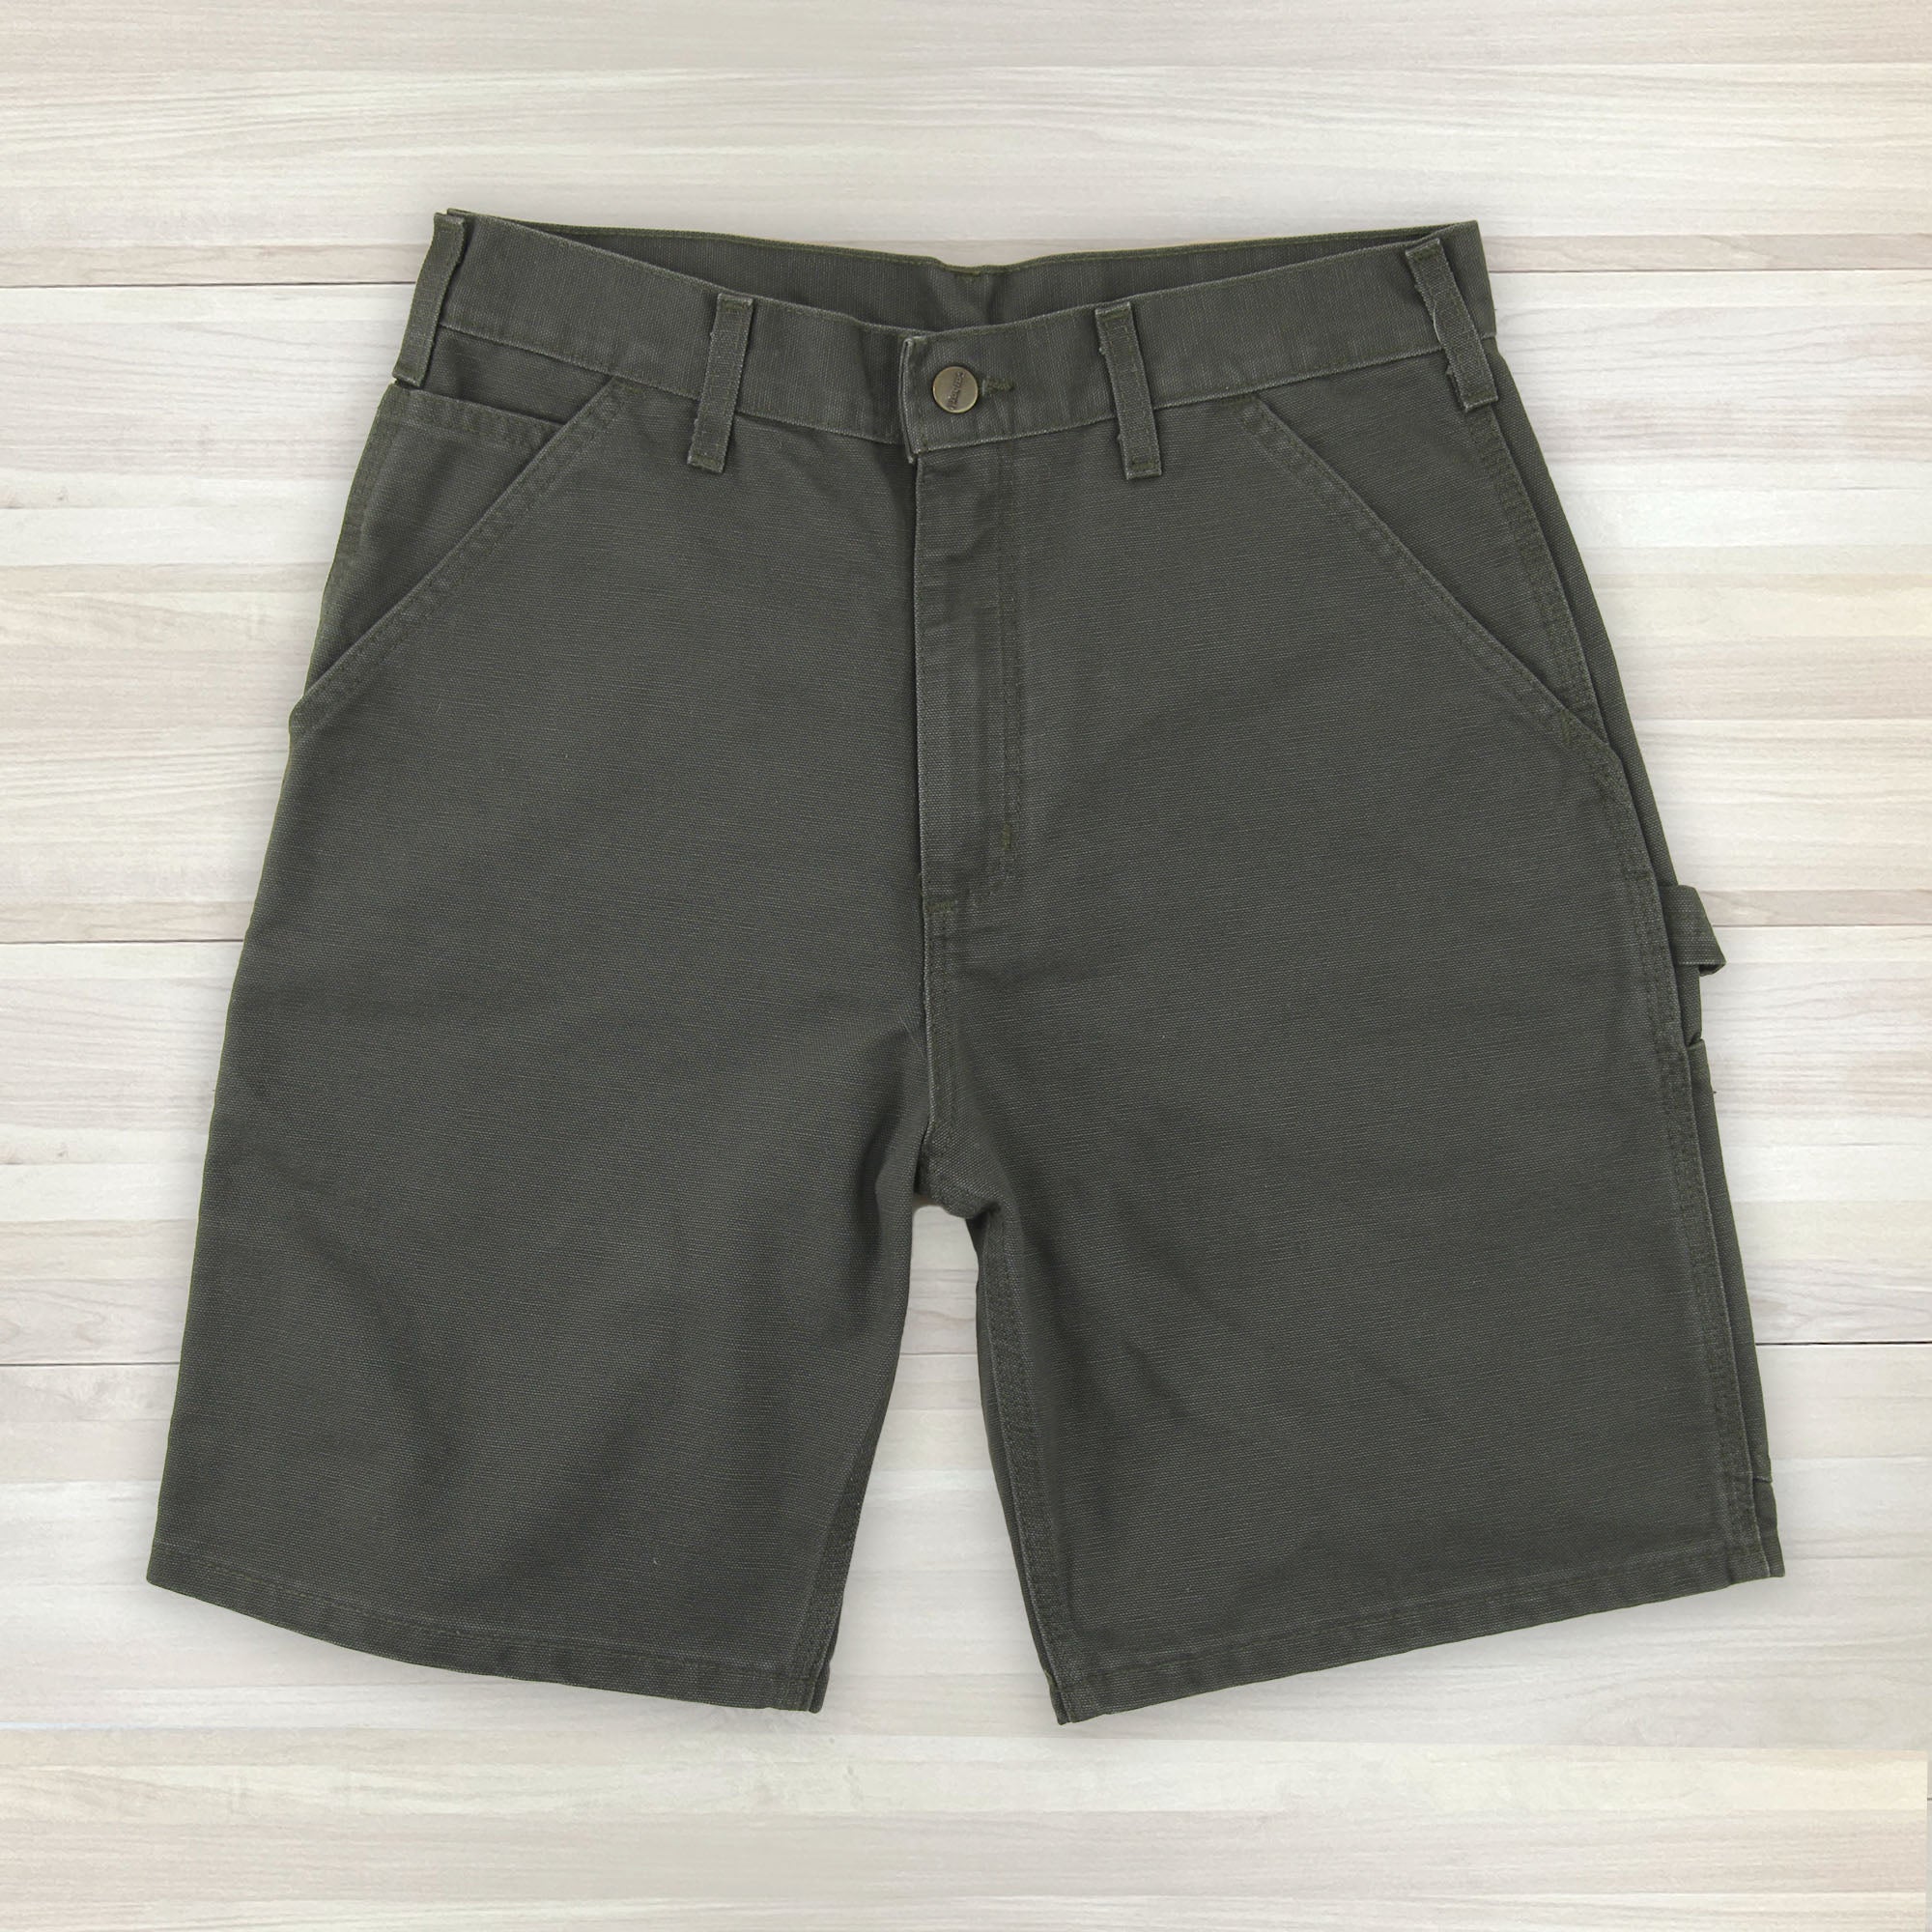 Men's Vintage Carhartt B25 Moss Washed Duck Shorts NWT 30x8.5